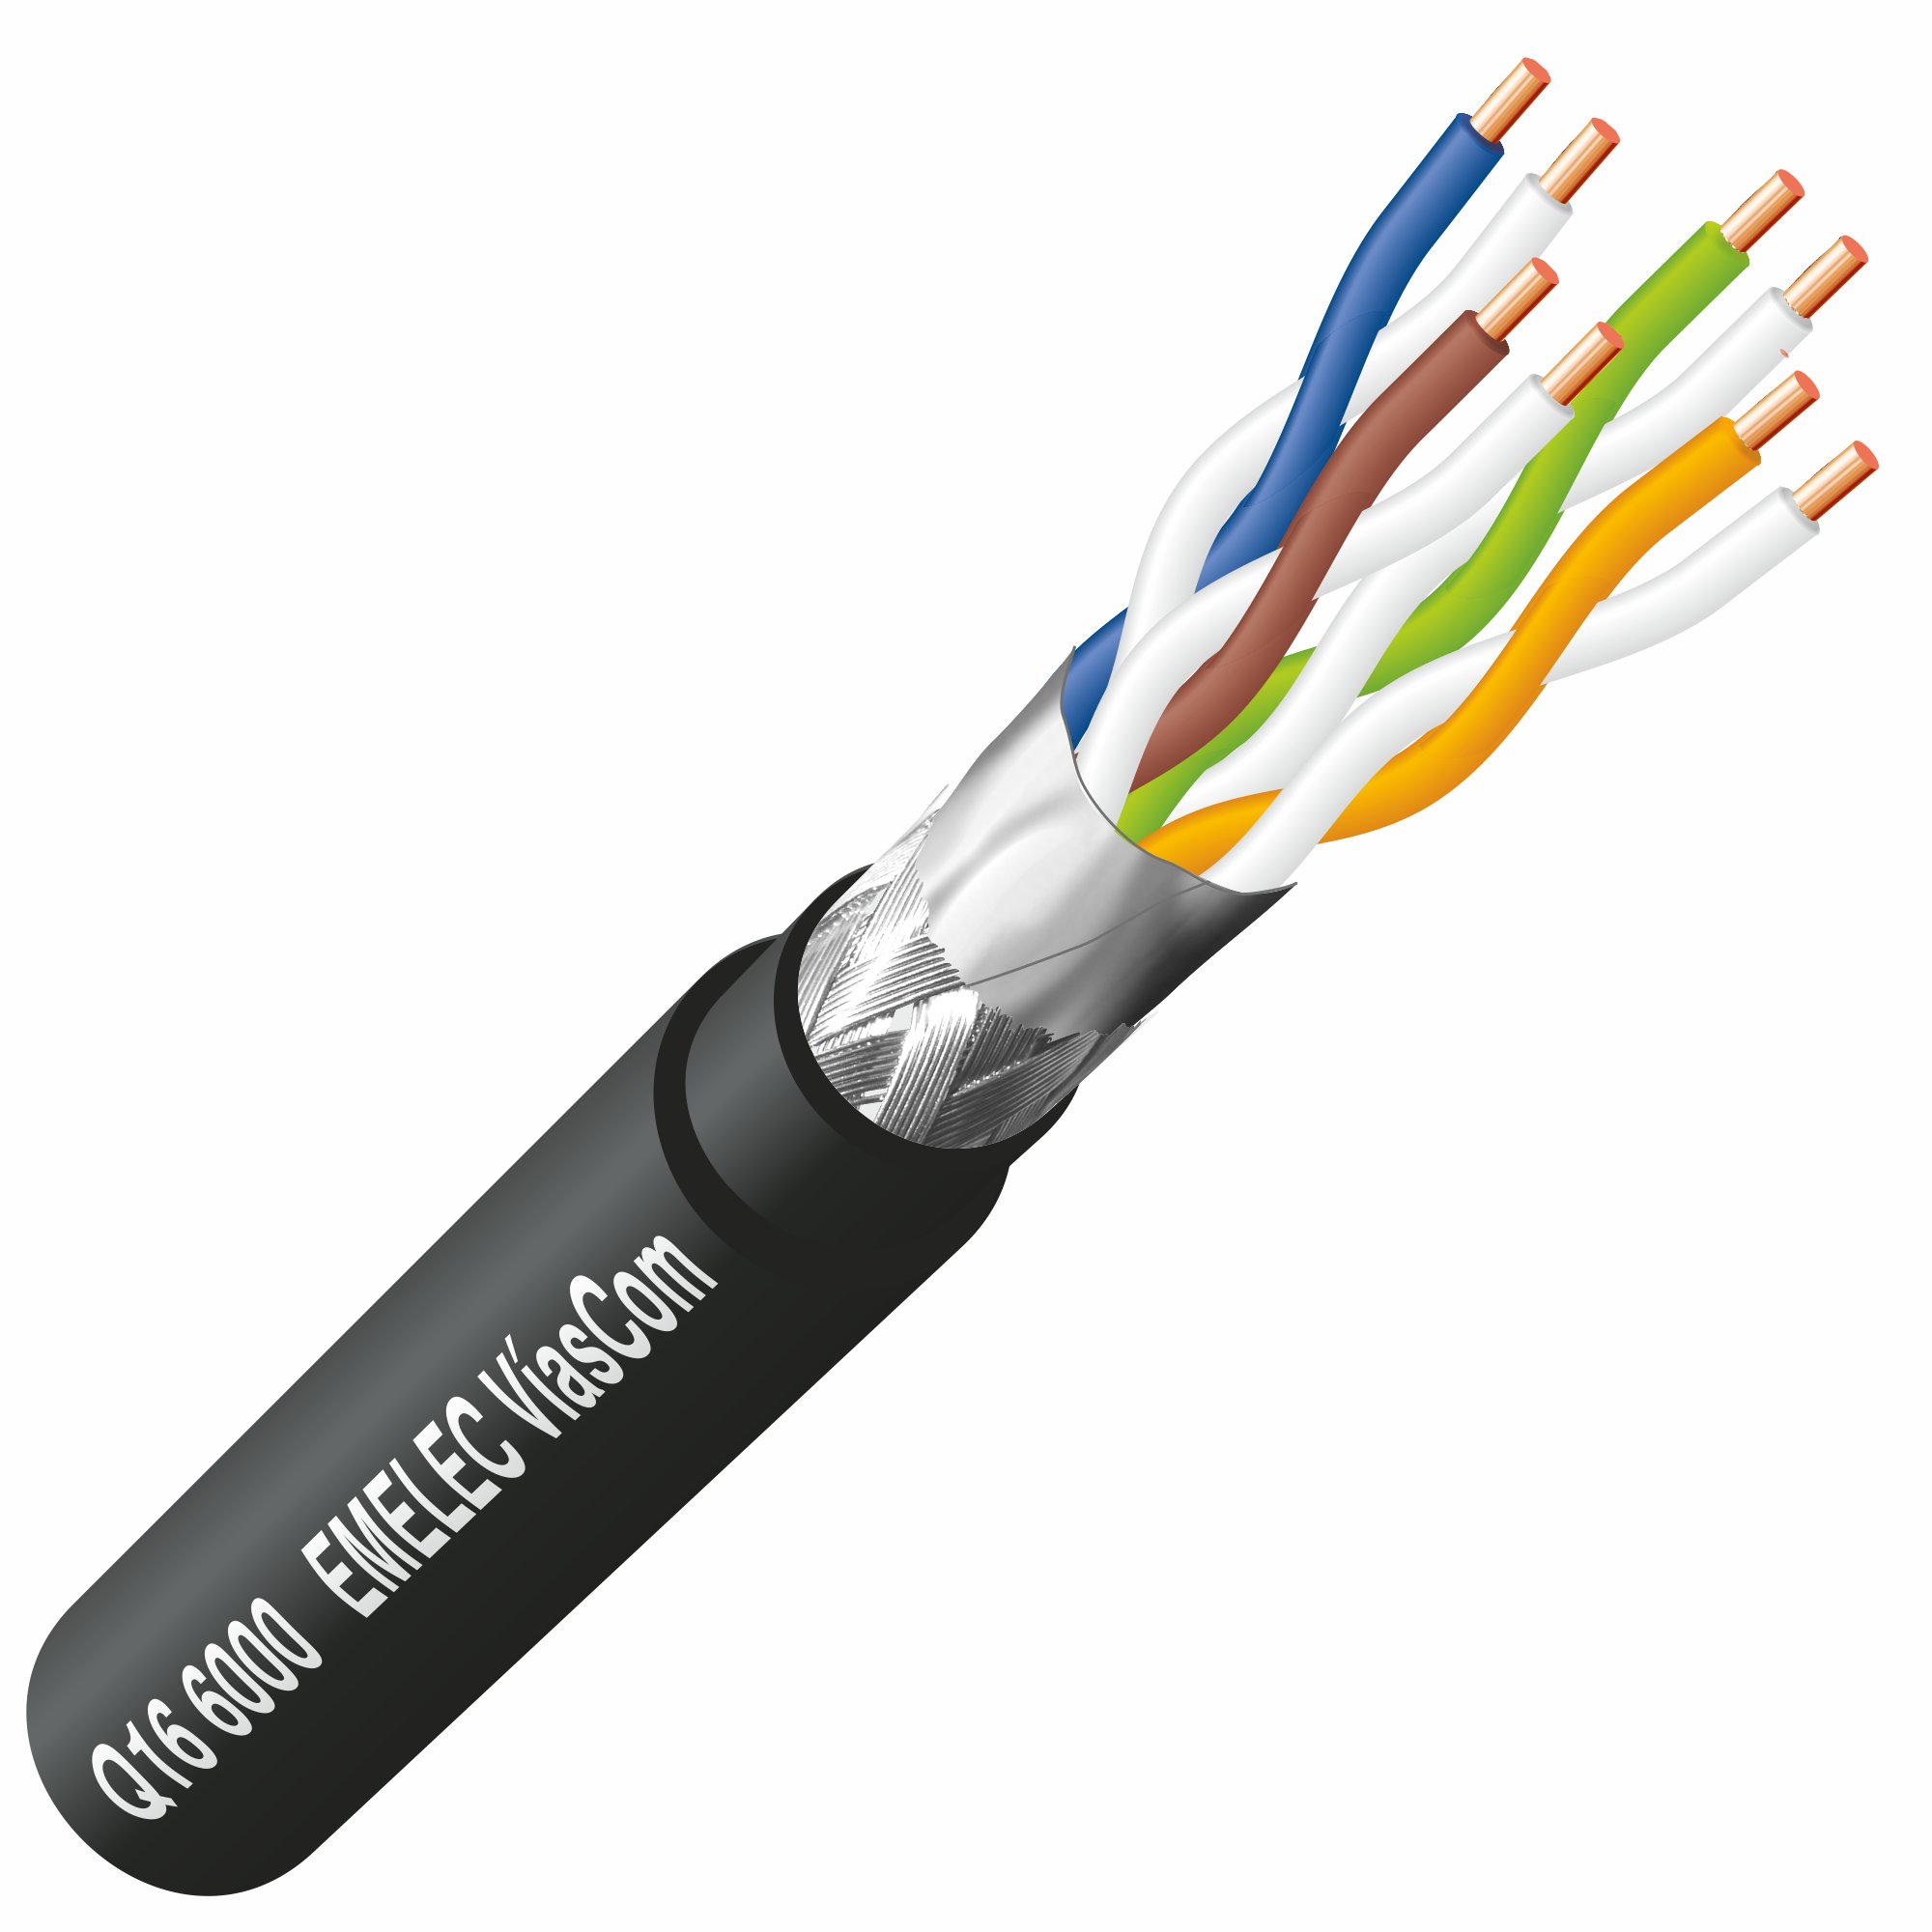 Category 6 UTP LAN cable with double pvc jacket and double shielding, braided and aluminum tape